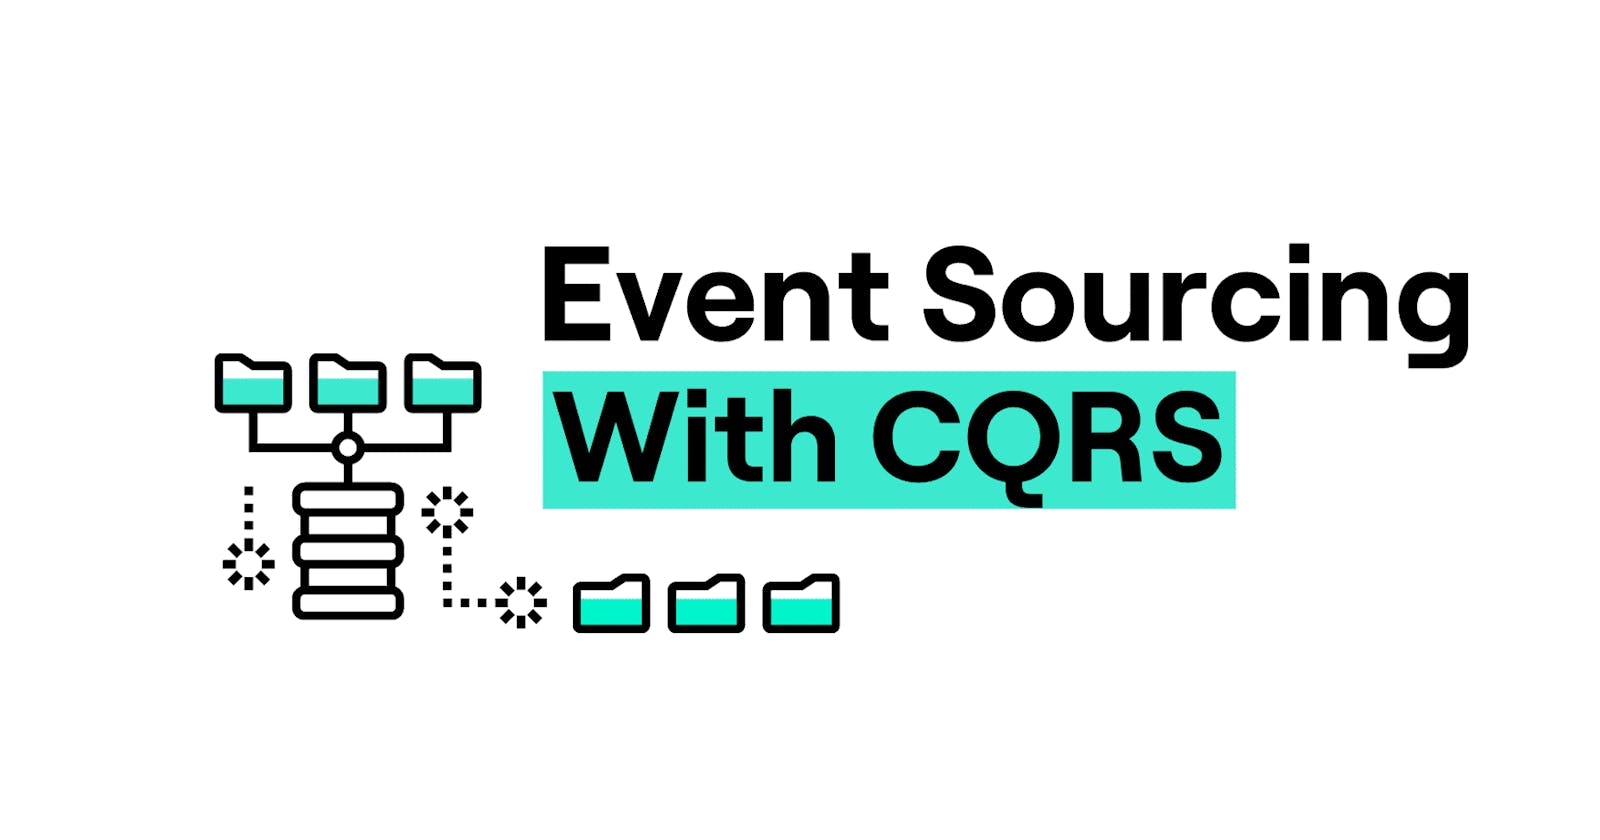 How to Implement Event-Sourcing with CQRS using EF Core and MediatR ?